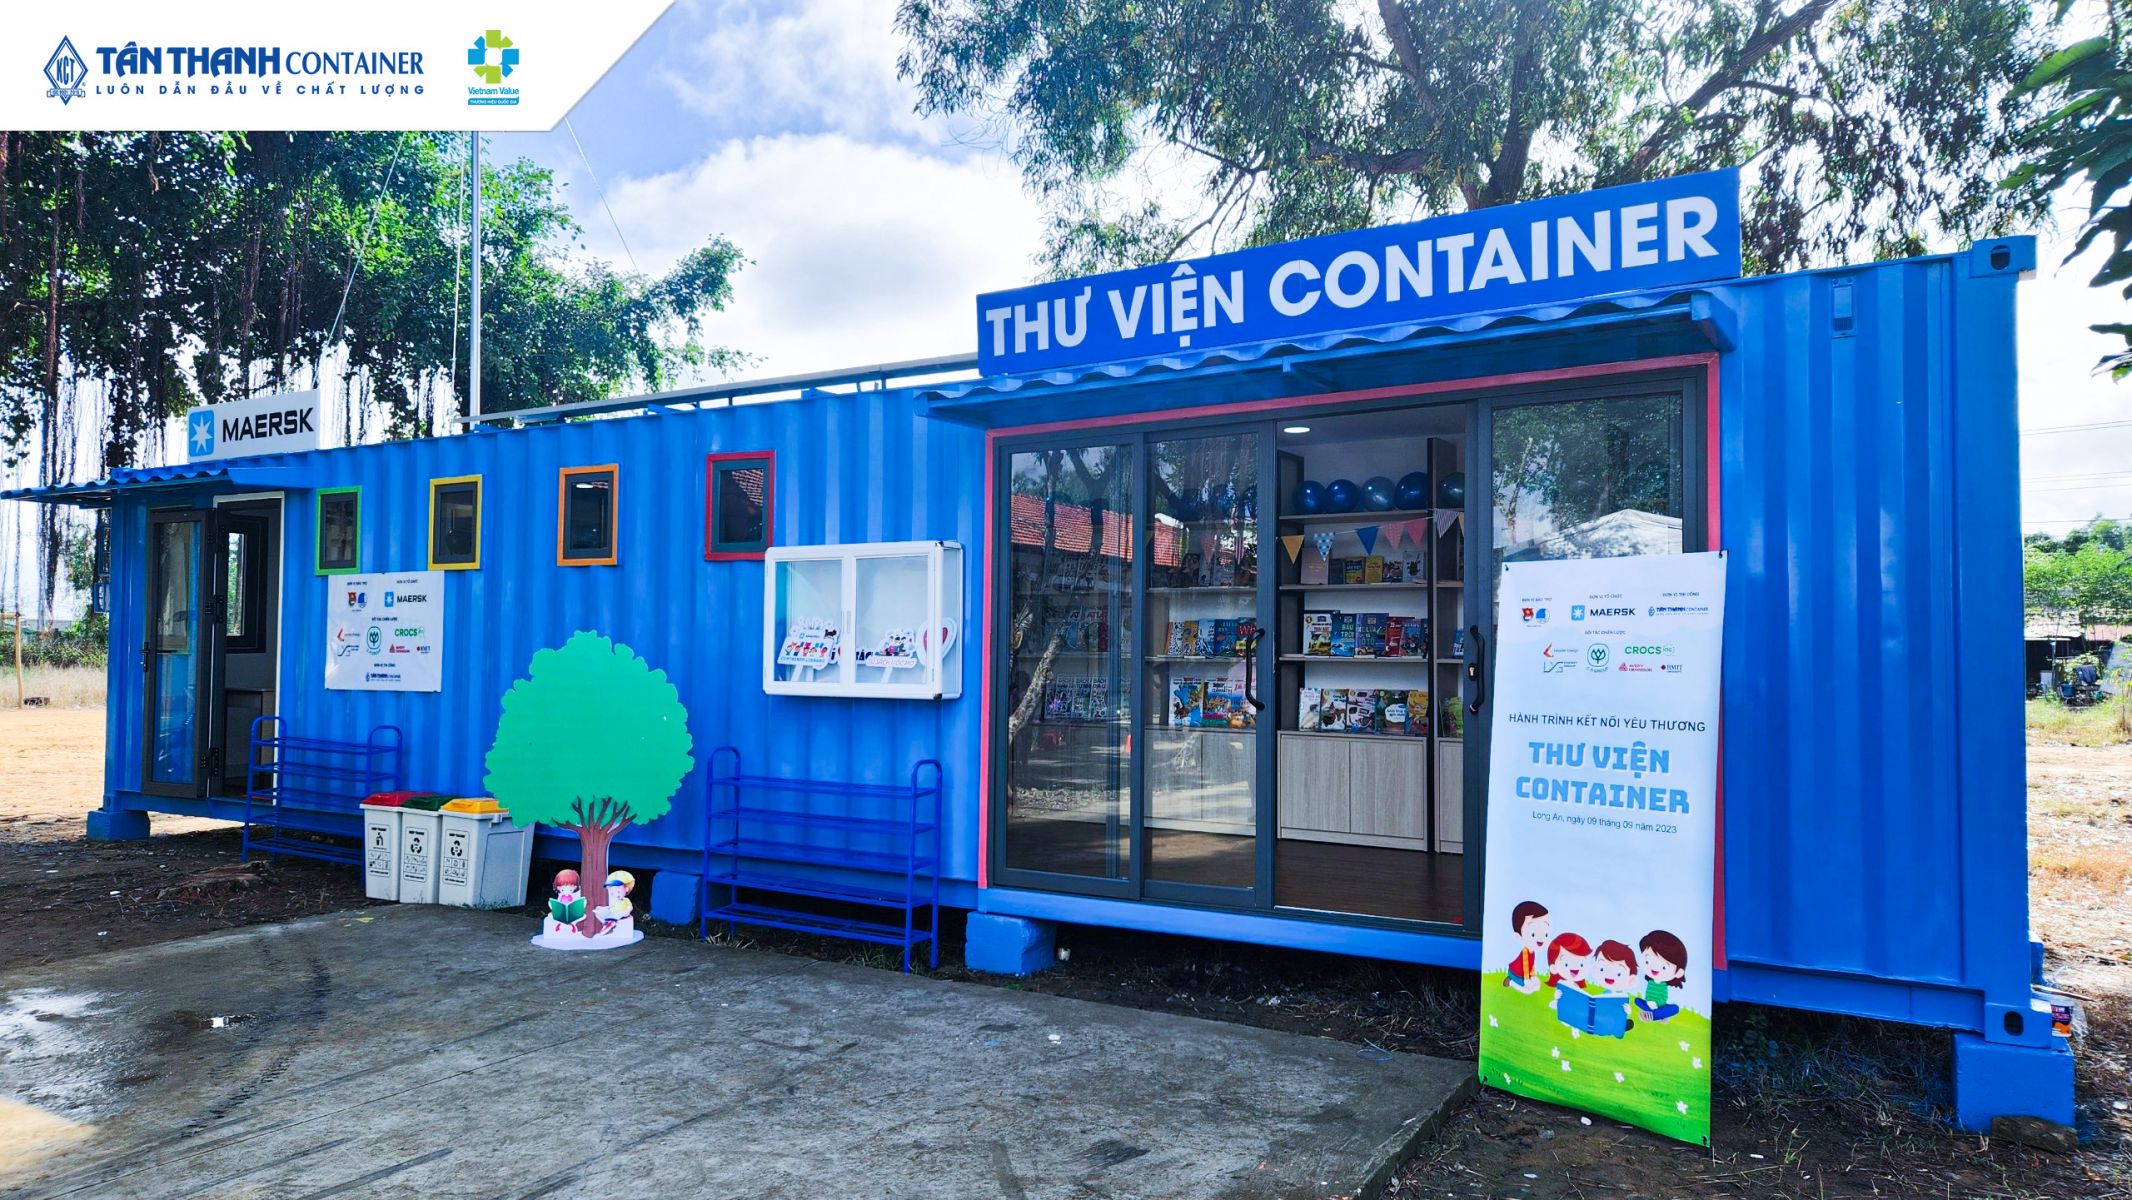 thư viện container Tân Thanh Container